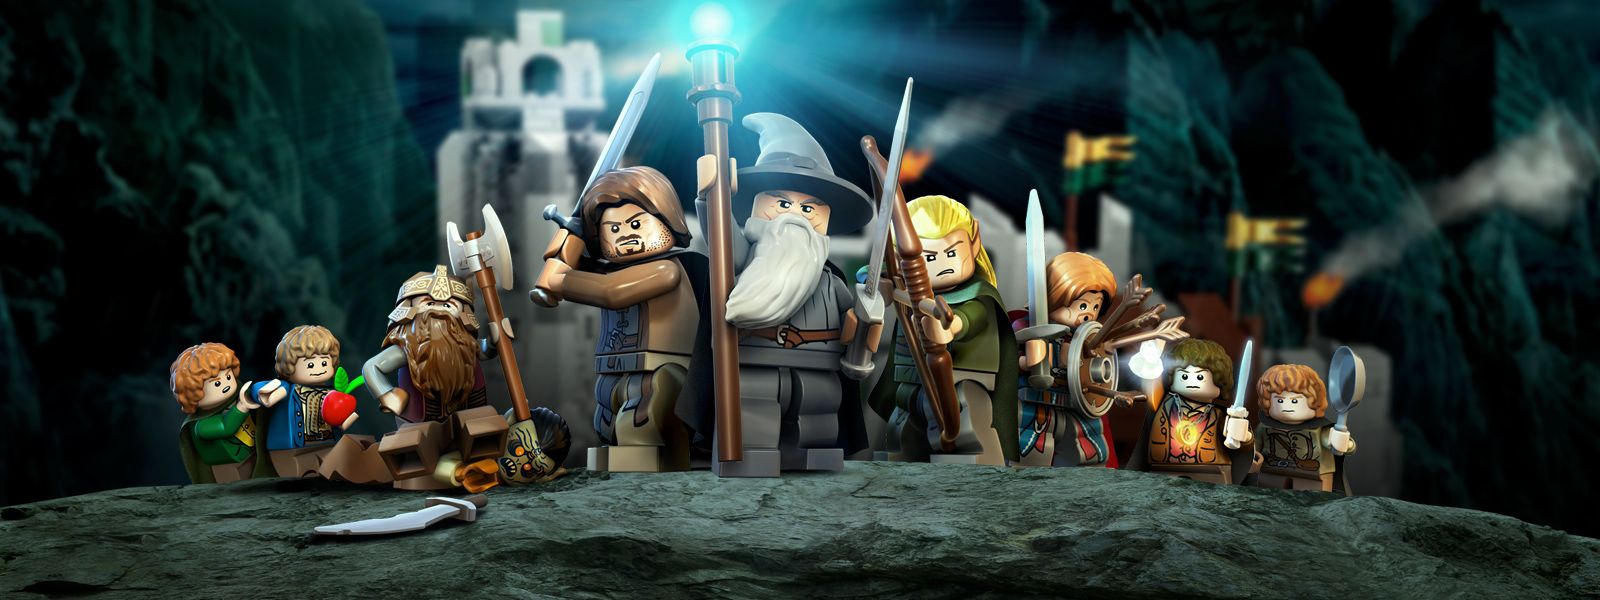 Lego: Lord of the rings